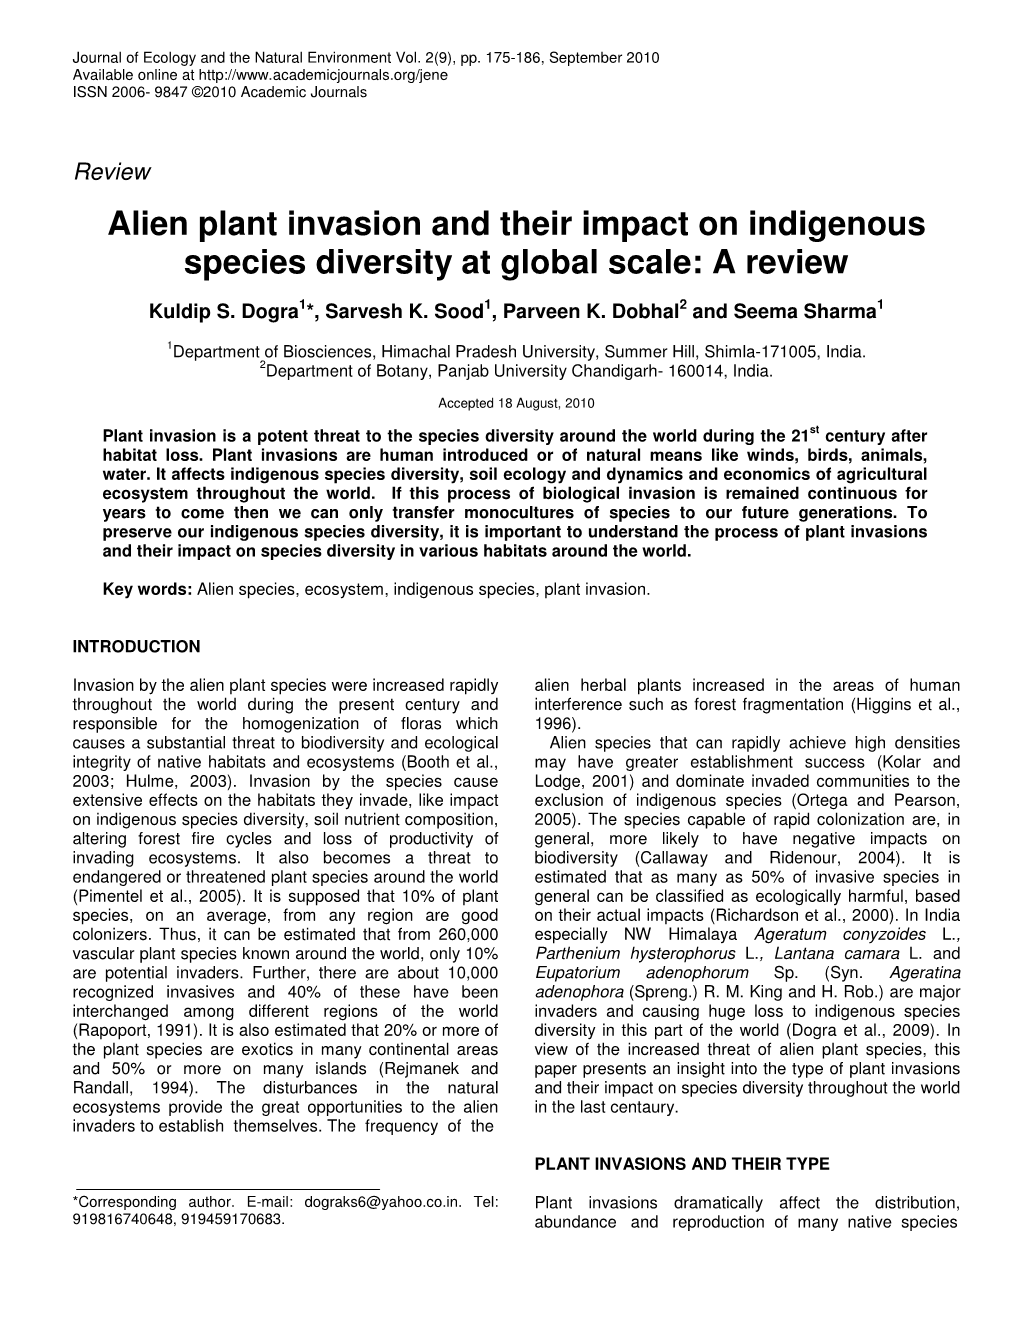 Alien Plant Invasion and Their Impact on Indigenous Species Diversity at Global Scale: a Review